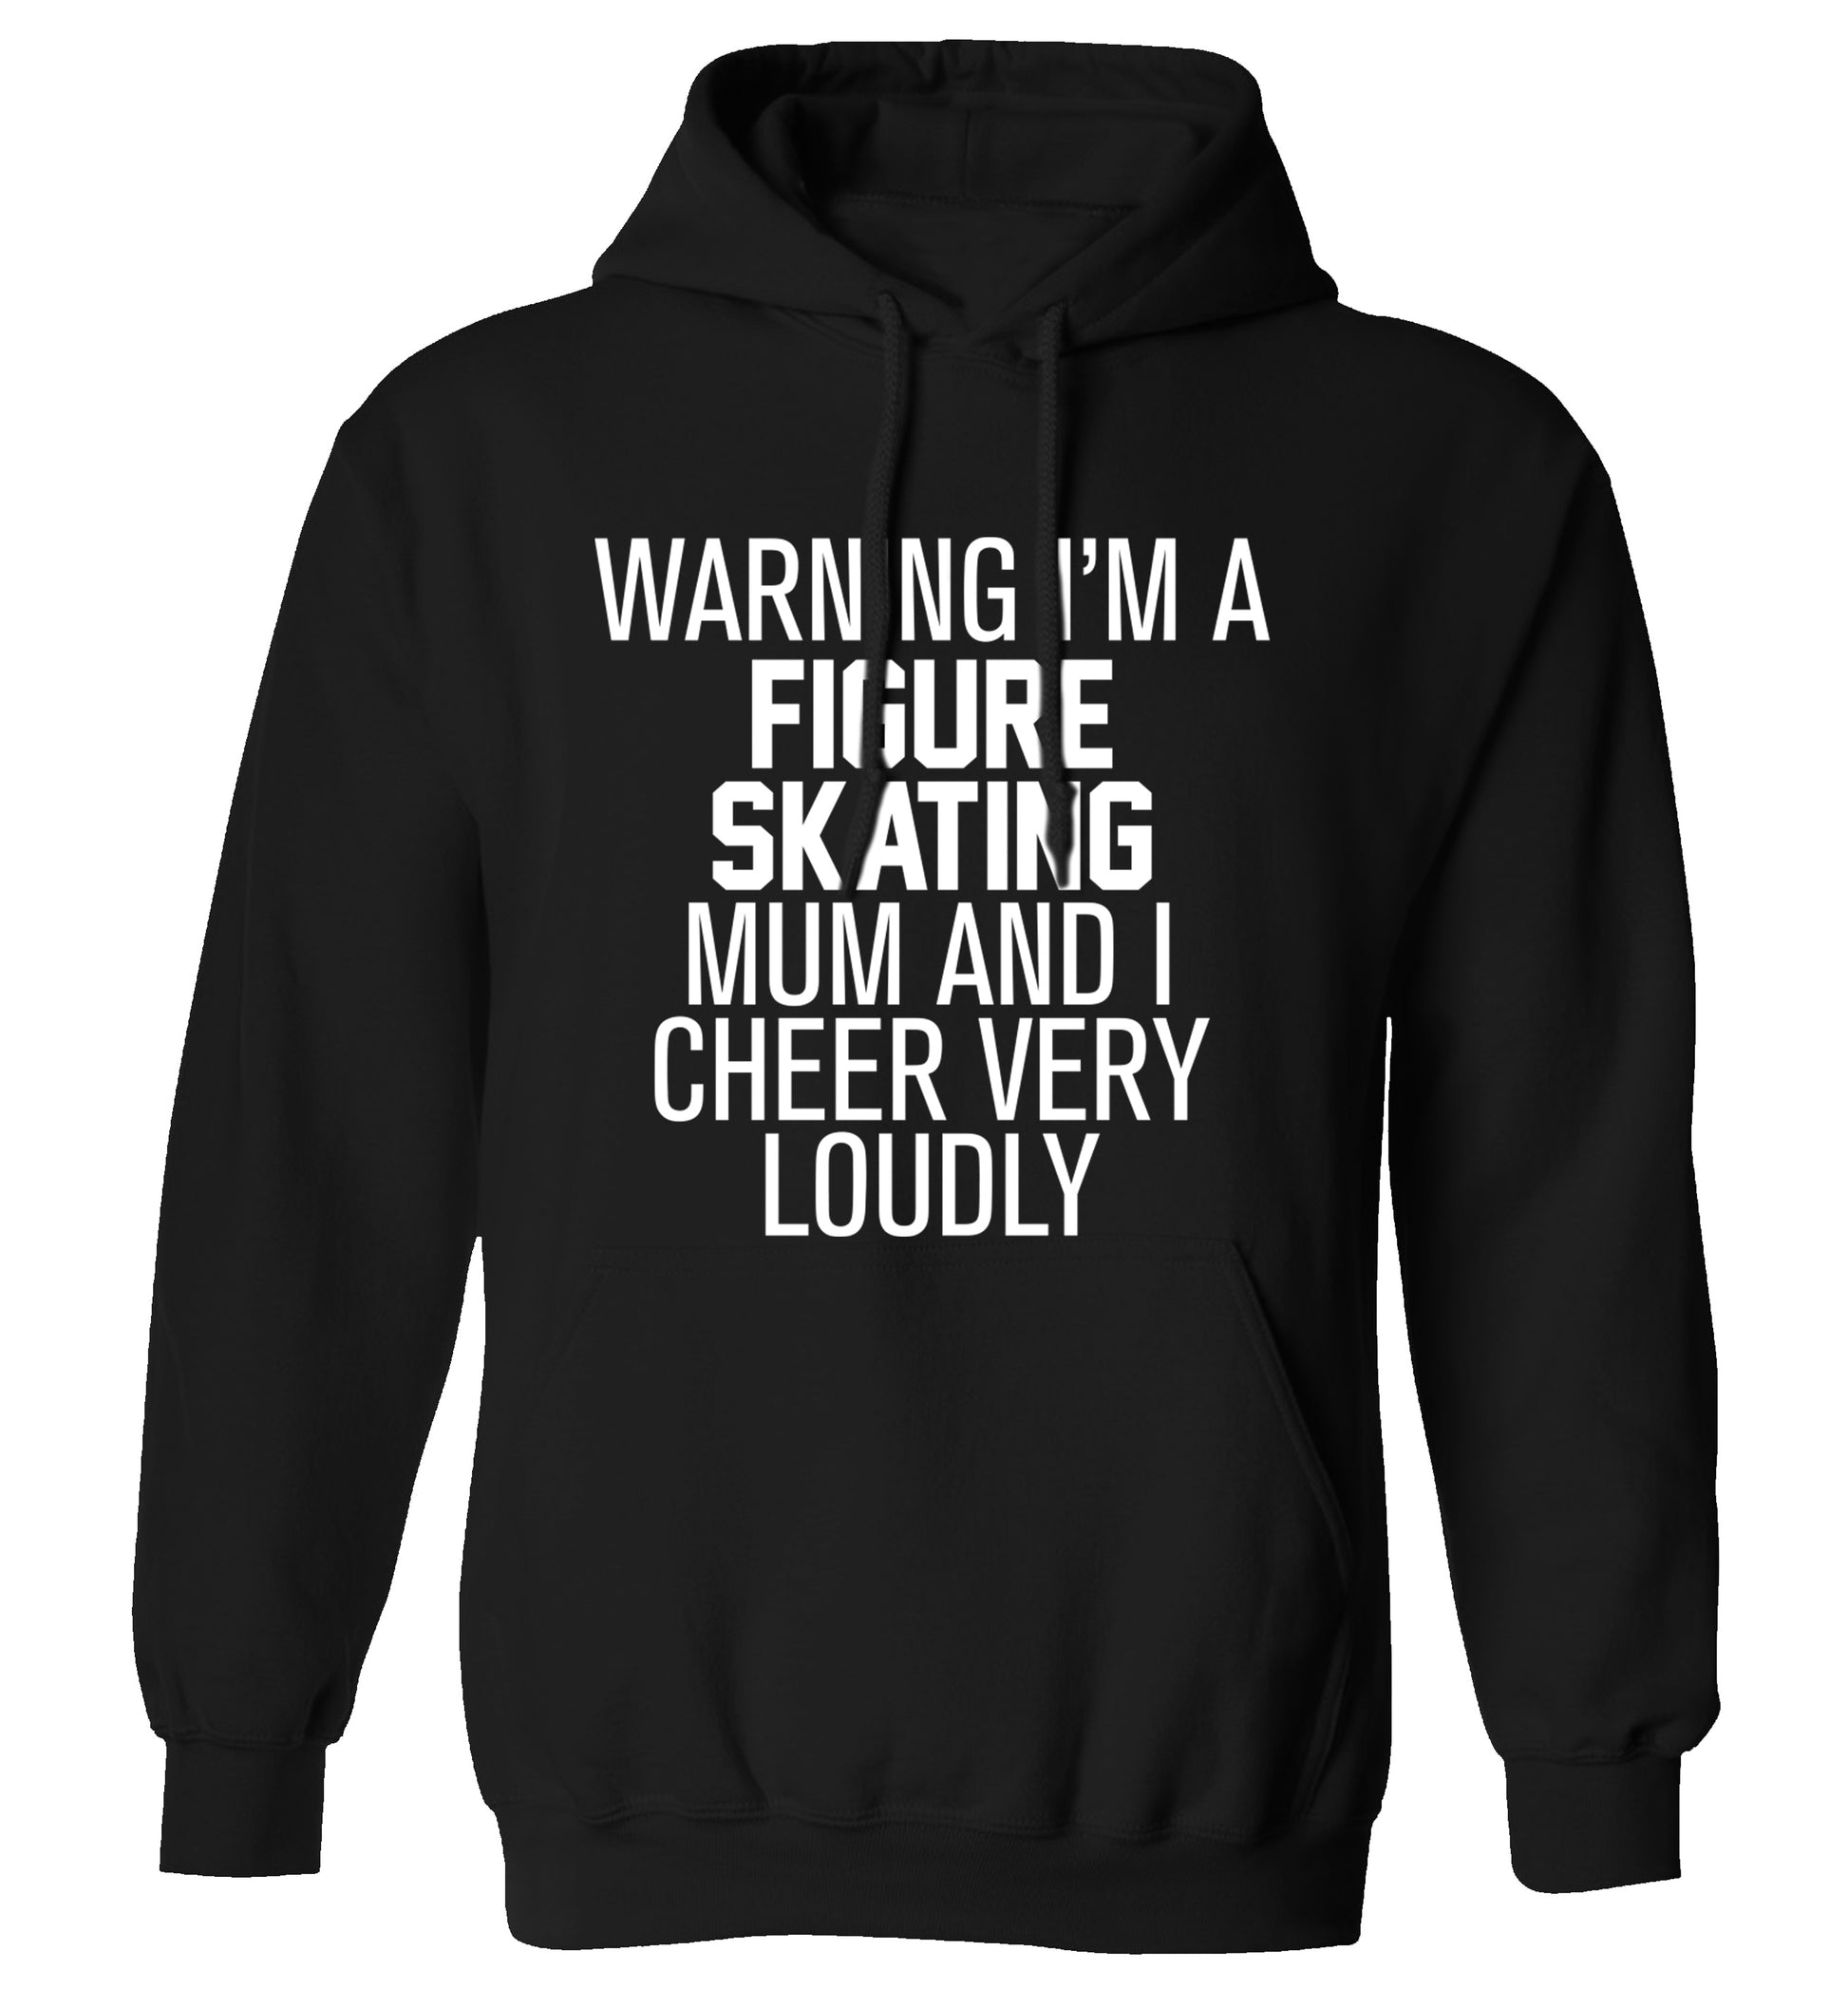 Warning I'm a figure skating mum and I cheer very loudly adults unisexblack hoodie 2XL